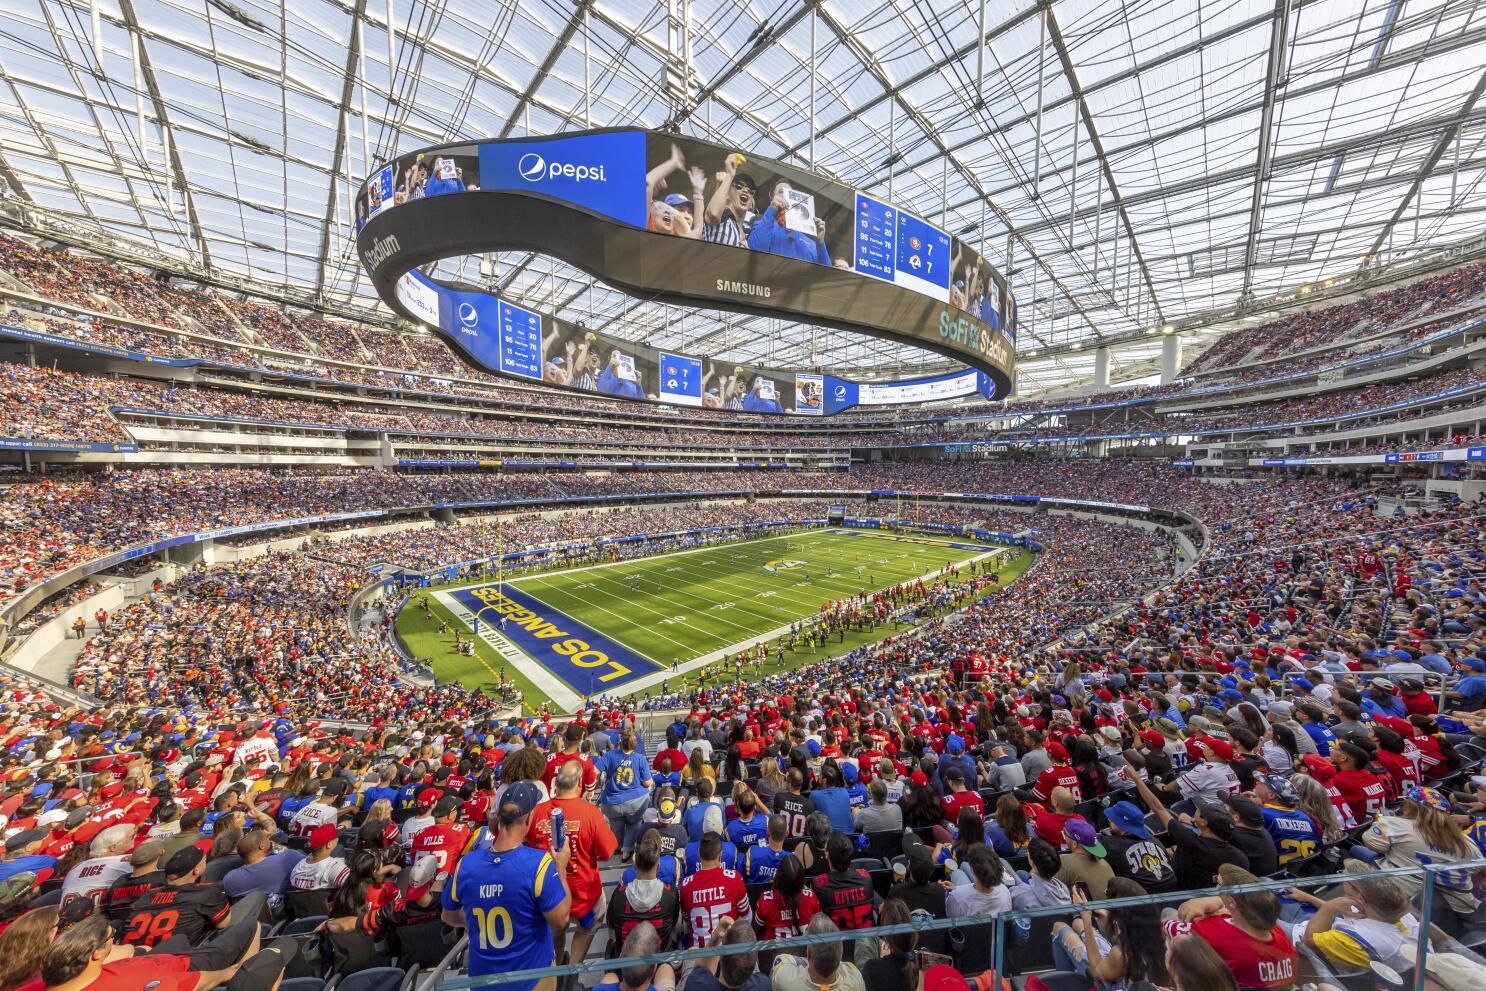 49ers fans are projected to outnumber Rams fans at SoFi Stadium